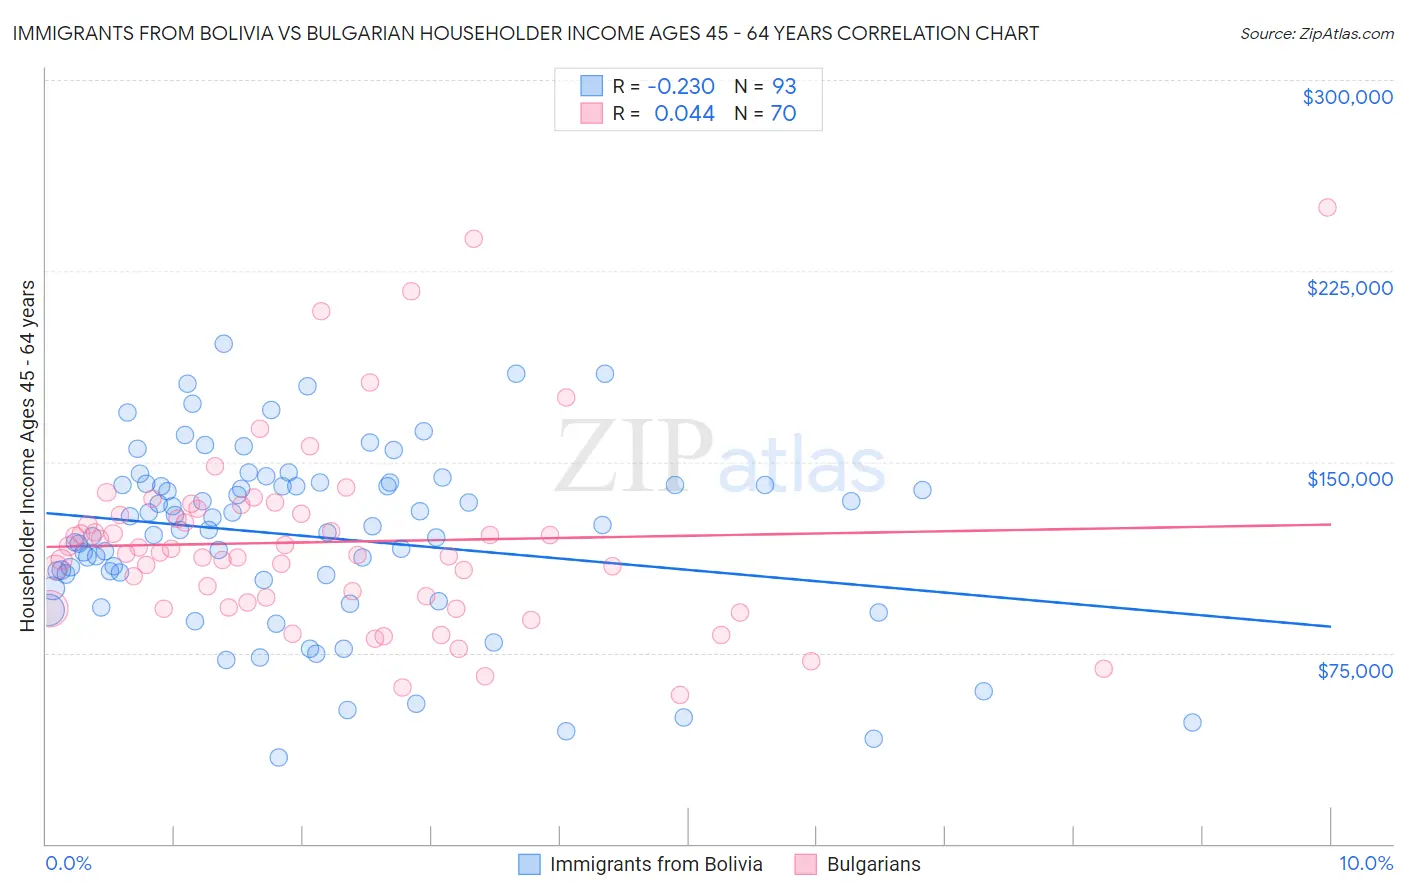 Immigrants from Bolivia vs Bulgarian Householder Income Ages 45 - 64 years